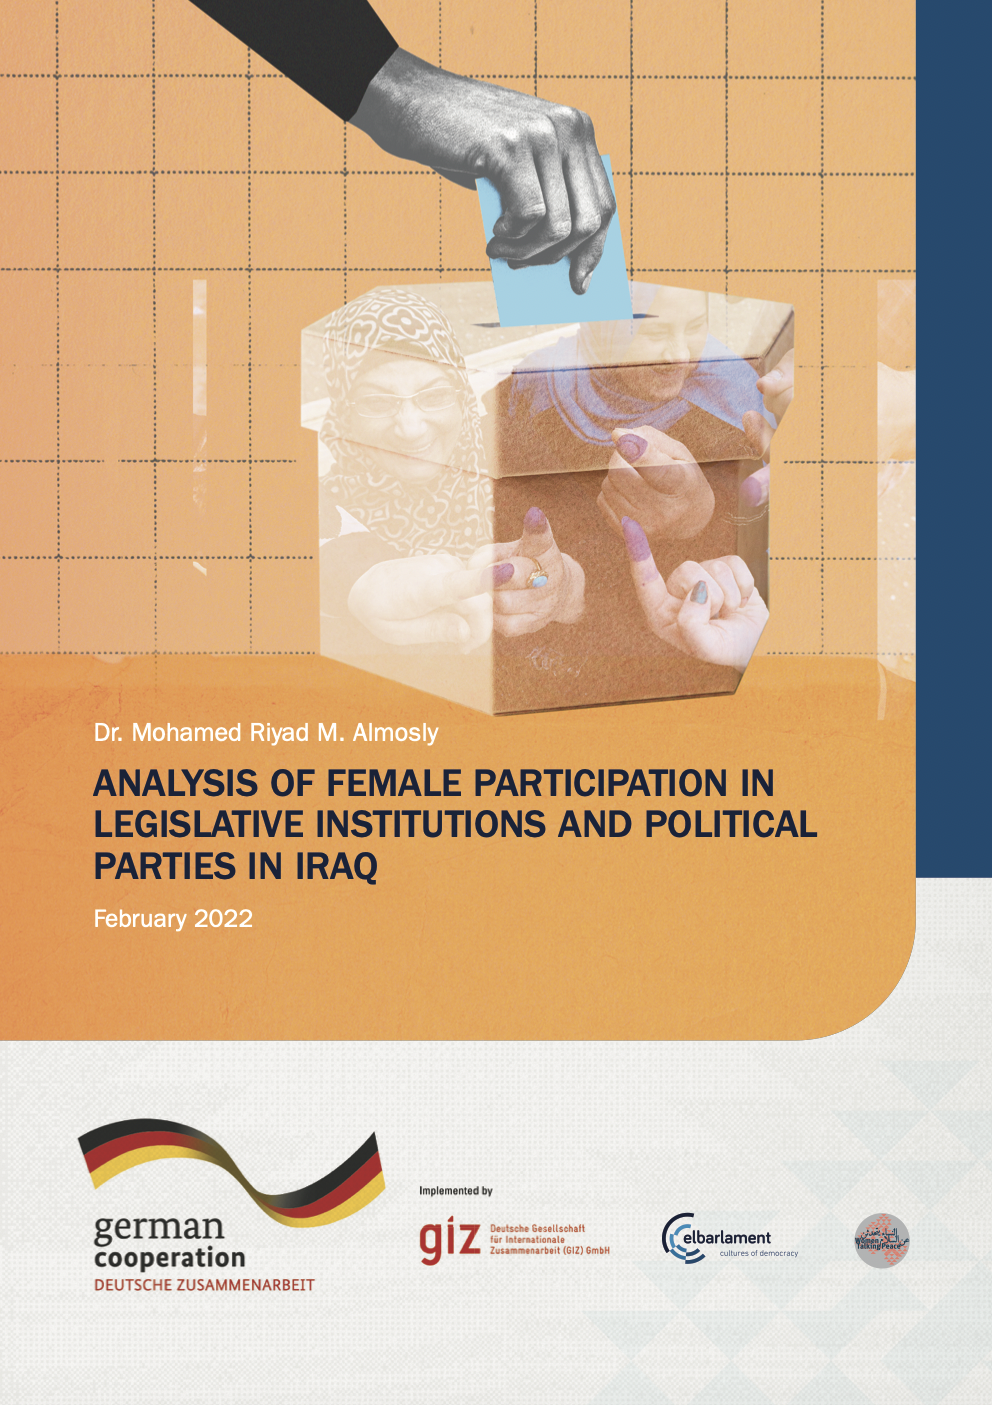 Analysis of female participation in legislative institutions and political parties in Iraq